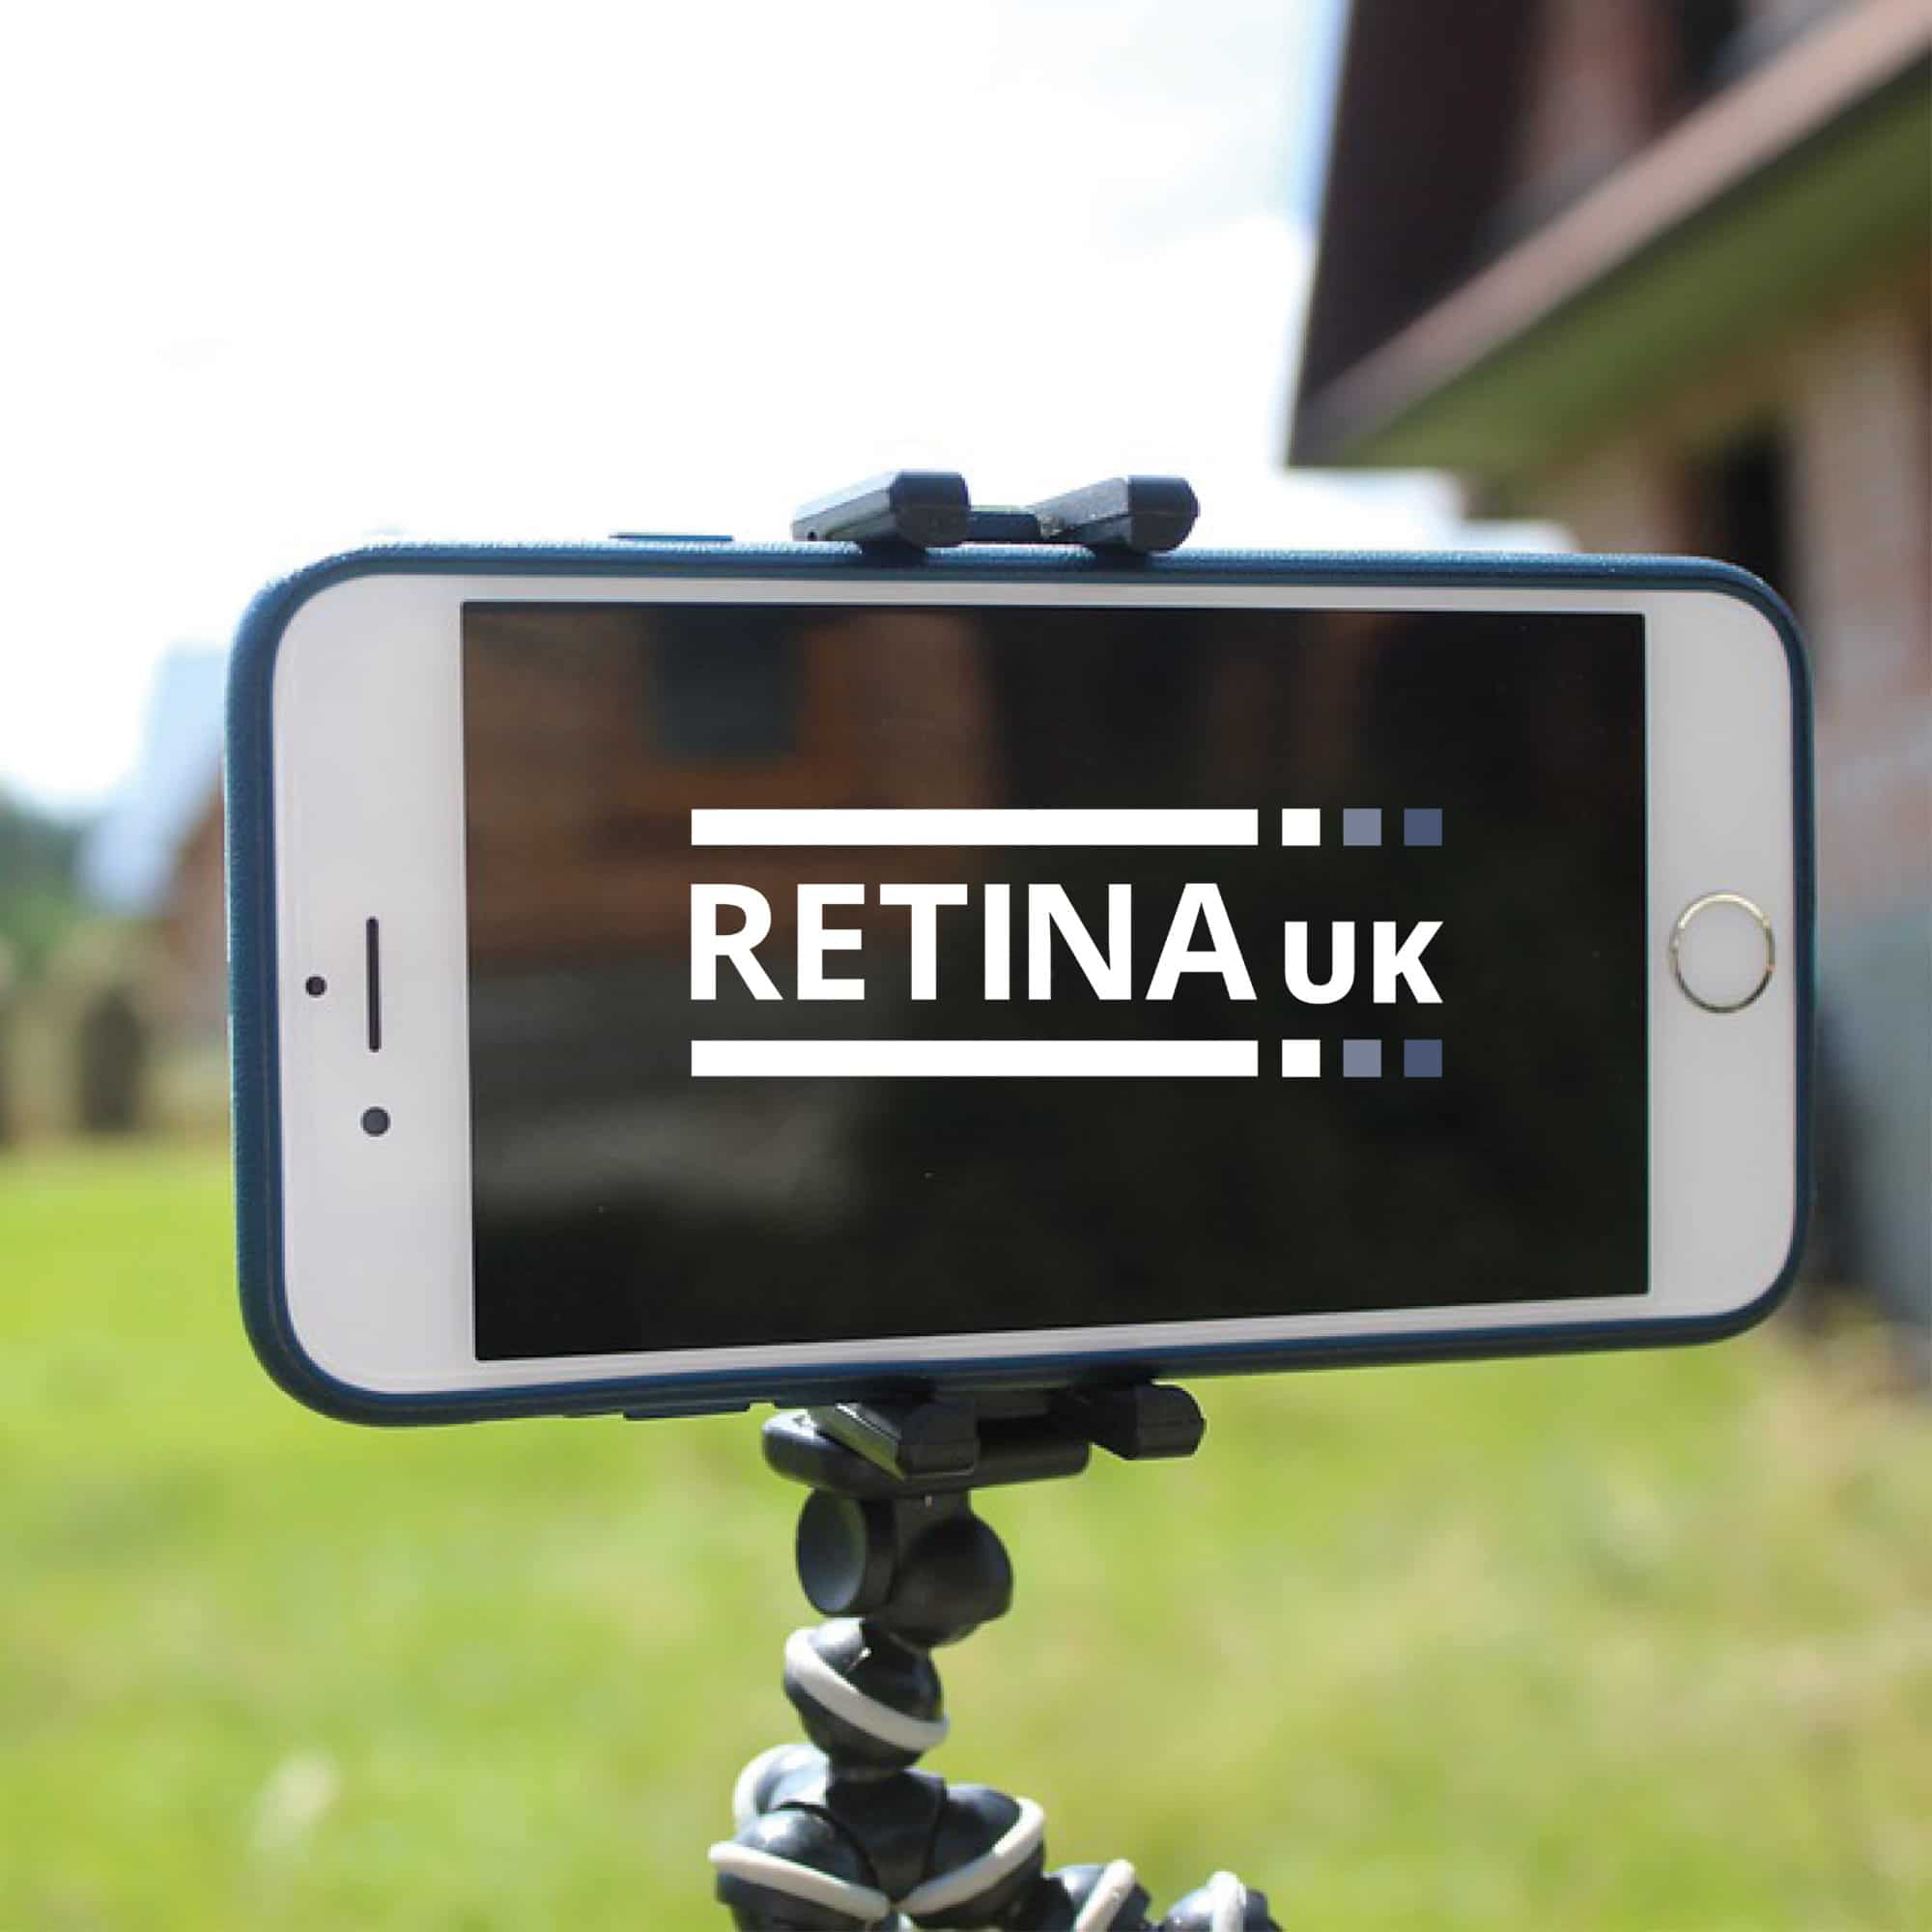 A mobile phone wiht the Retina UK logo on the screen. The phone is clamped into a tripod